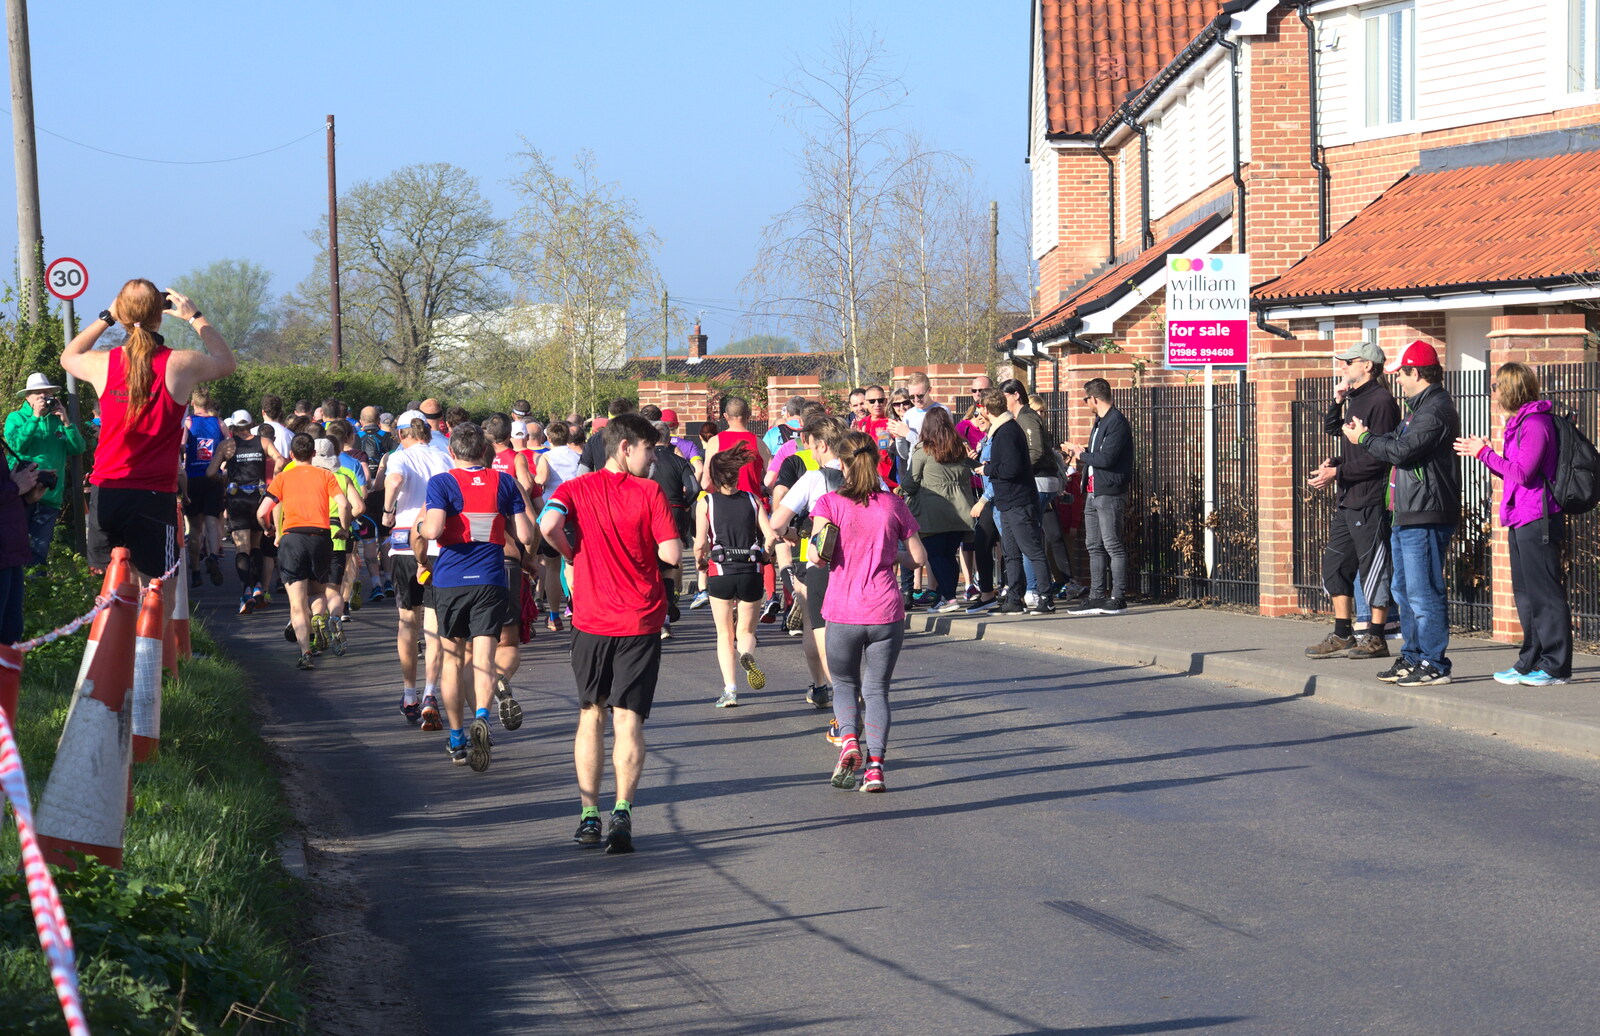 The marathon runners head off from The Black Dog Festival of Running, Bungay, Suffolk - 2nd April 2017